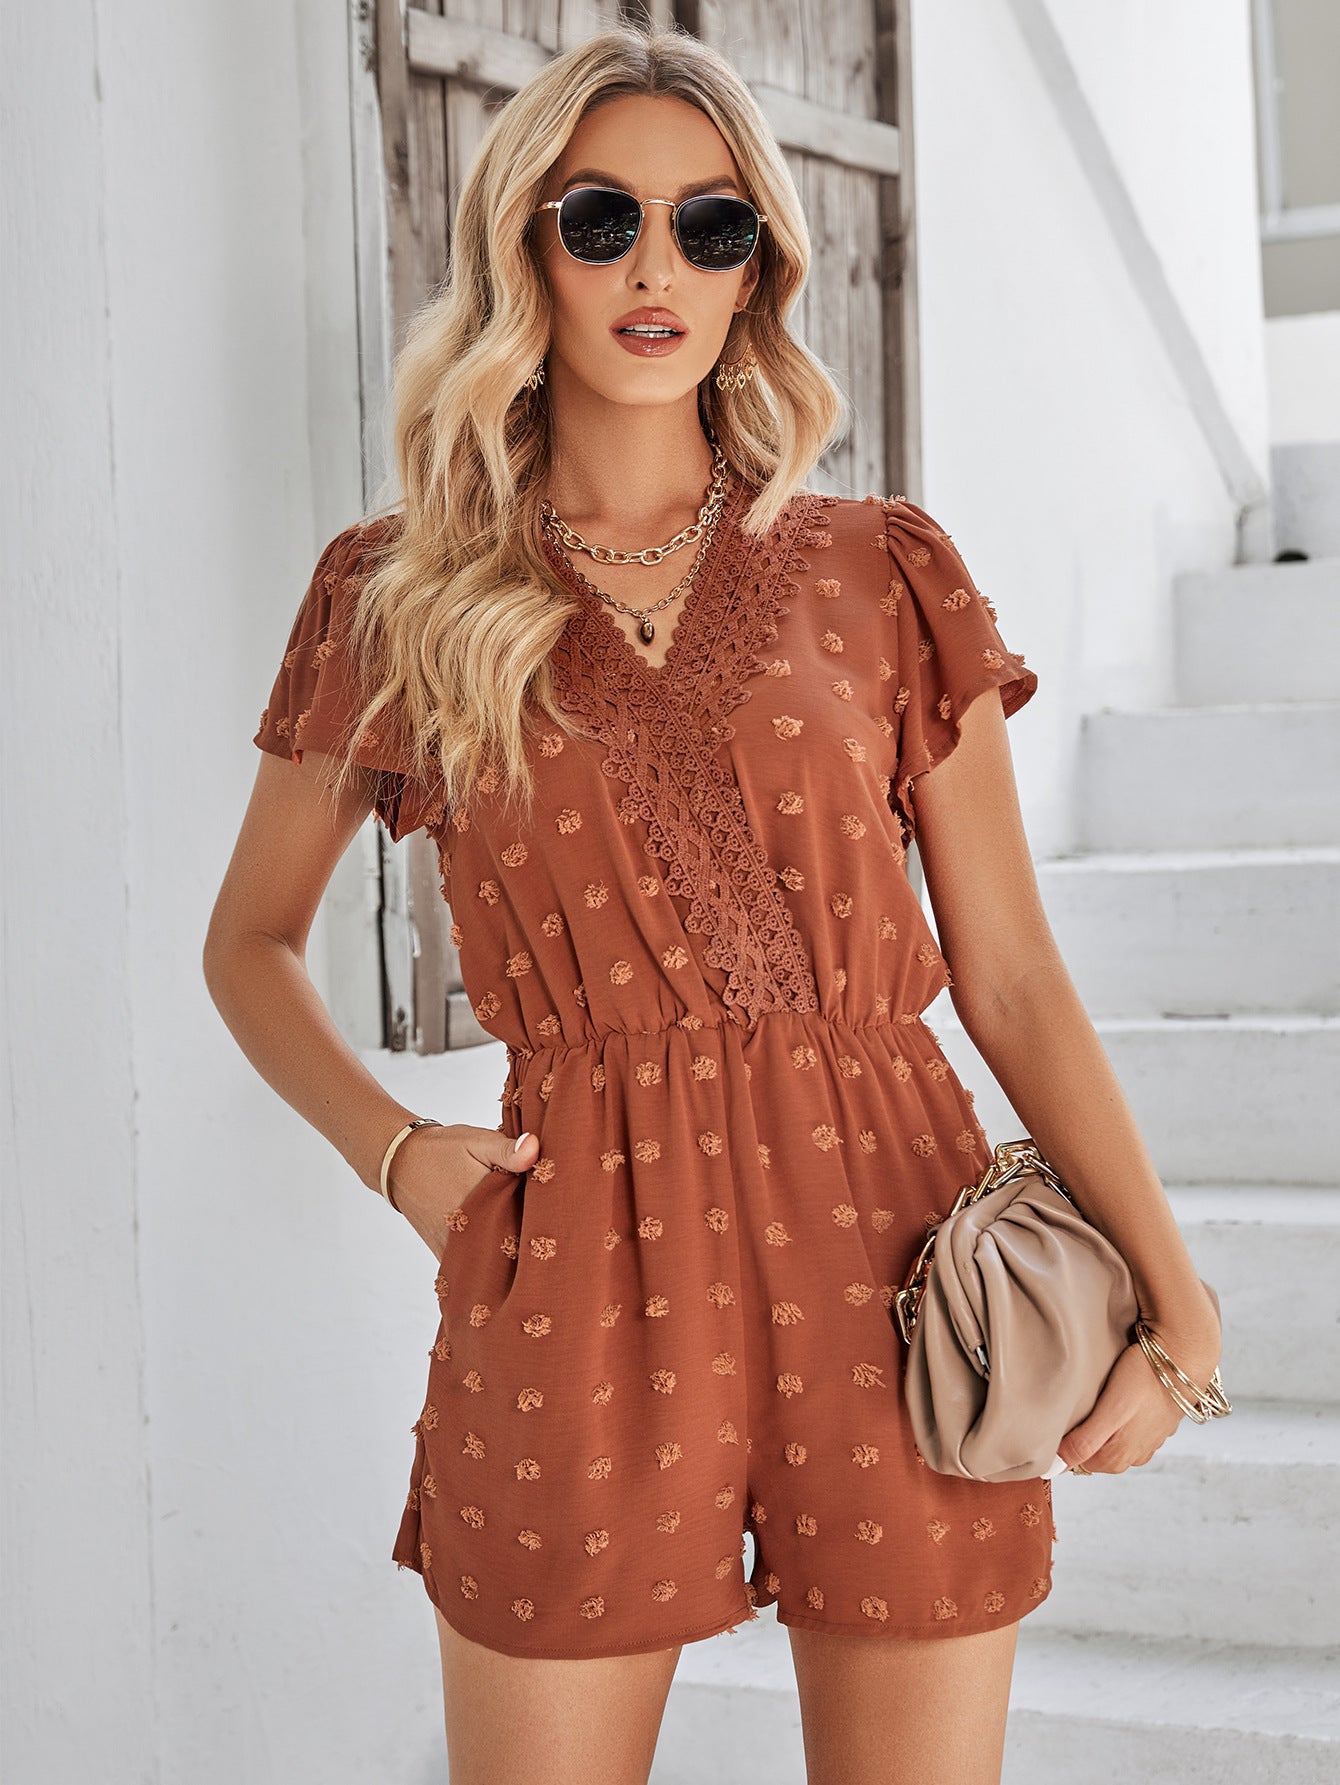 Swiss Dot Lace Trim Flutter Sleeve Romper with Pockets Playsuit  Sunset and Swim   